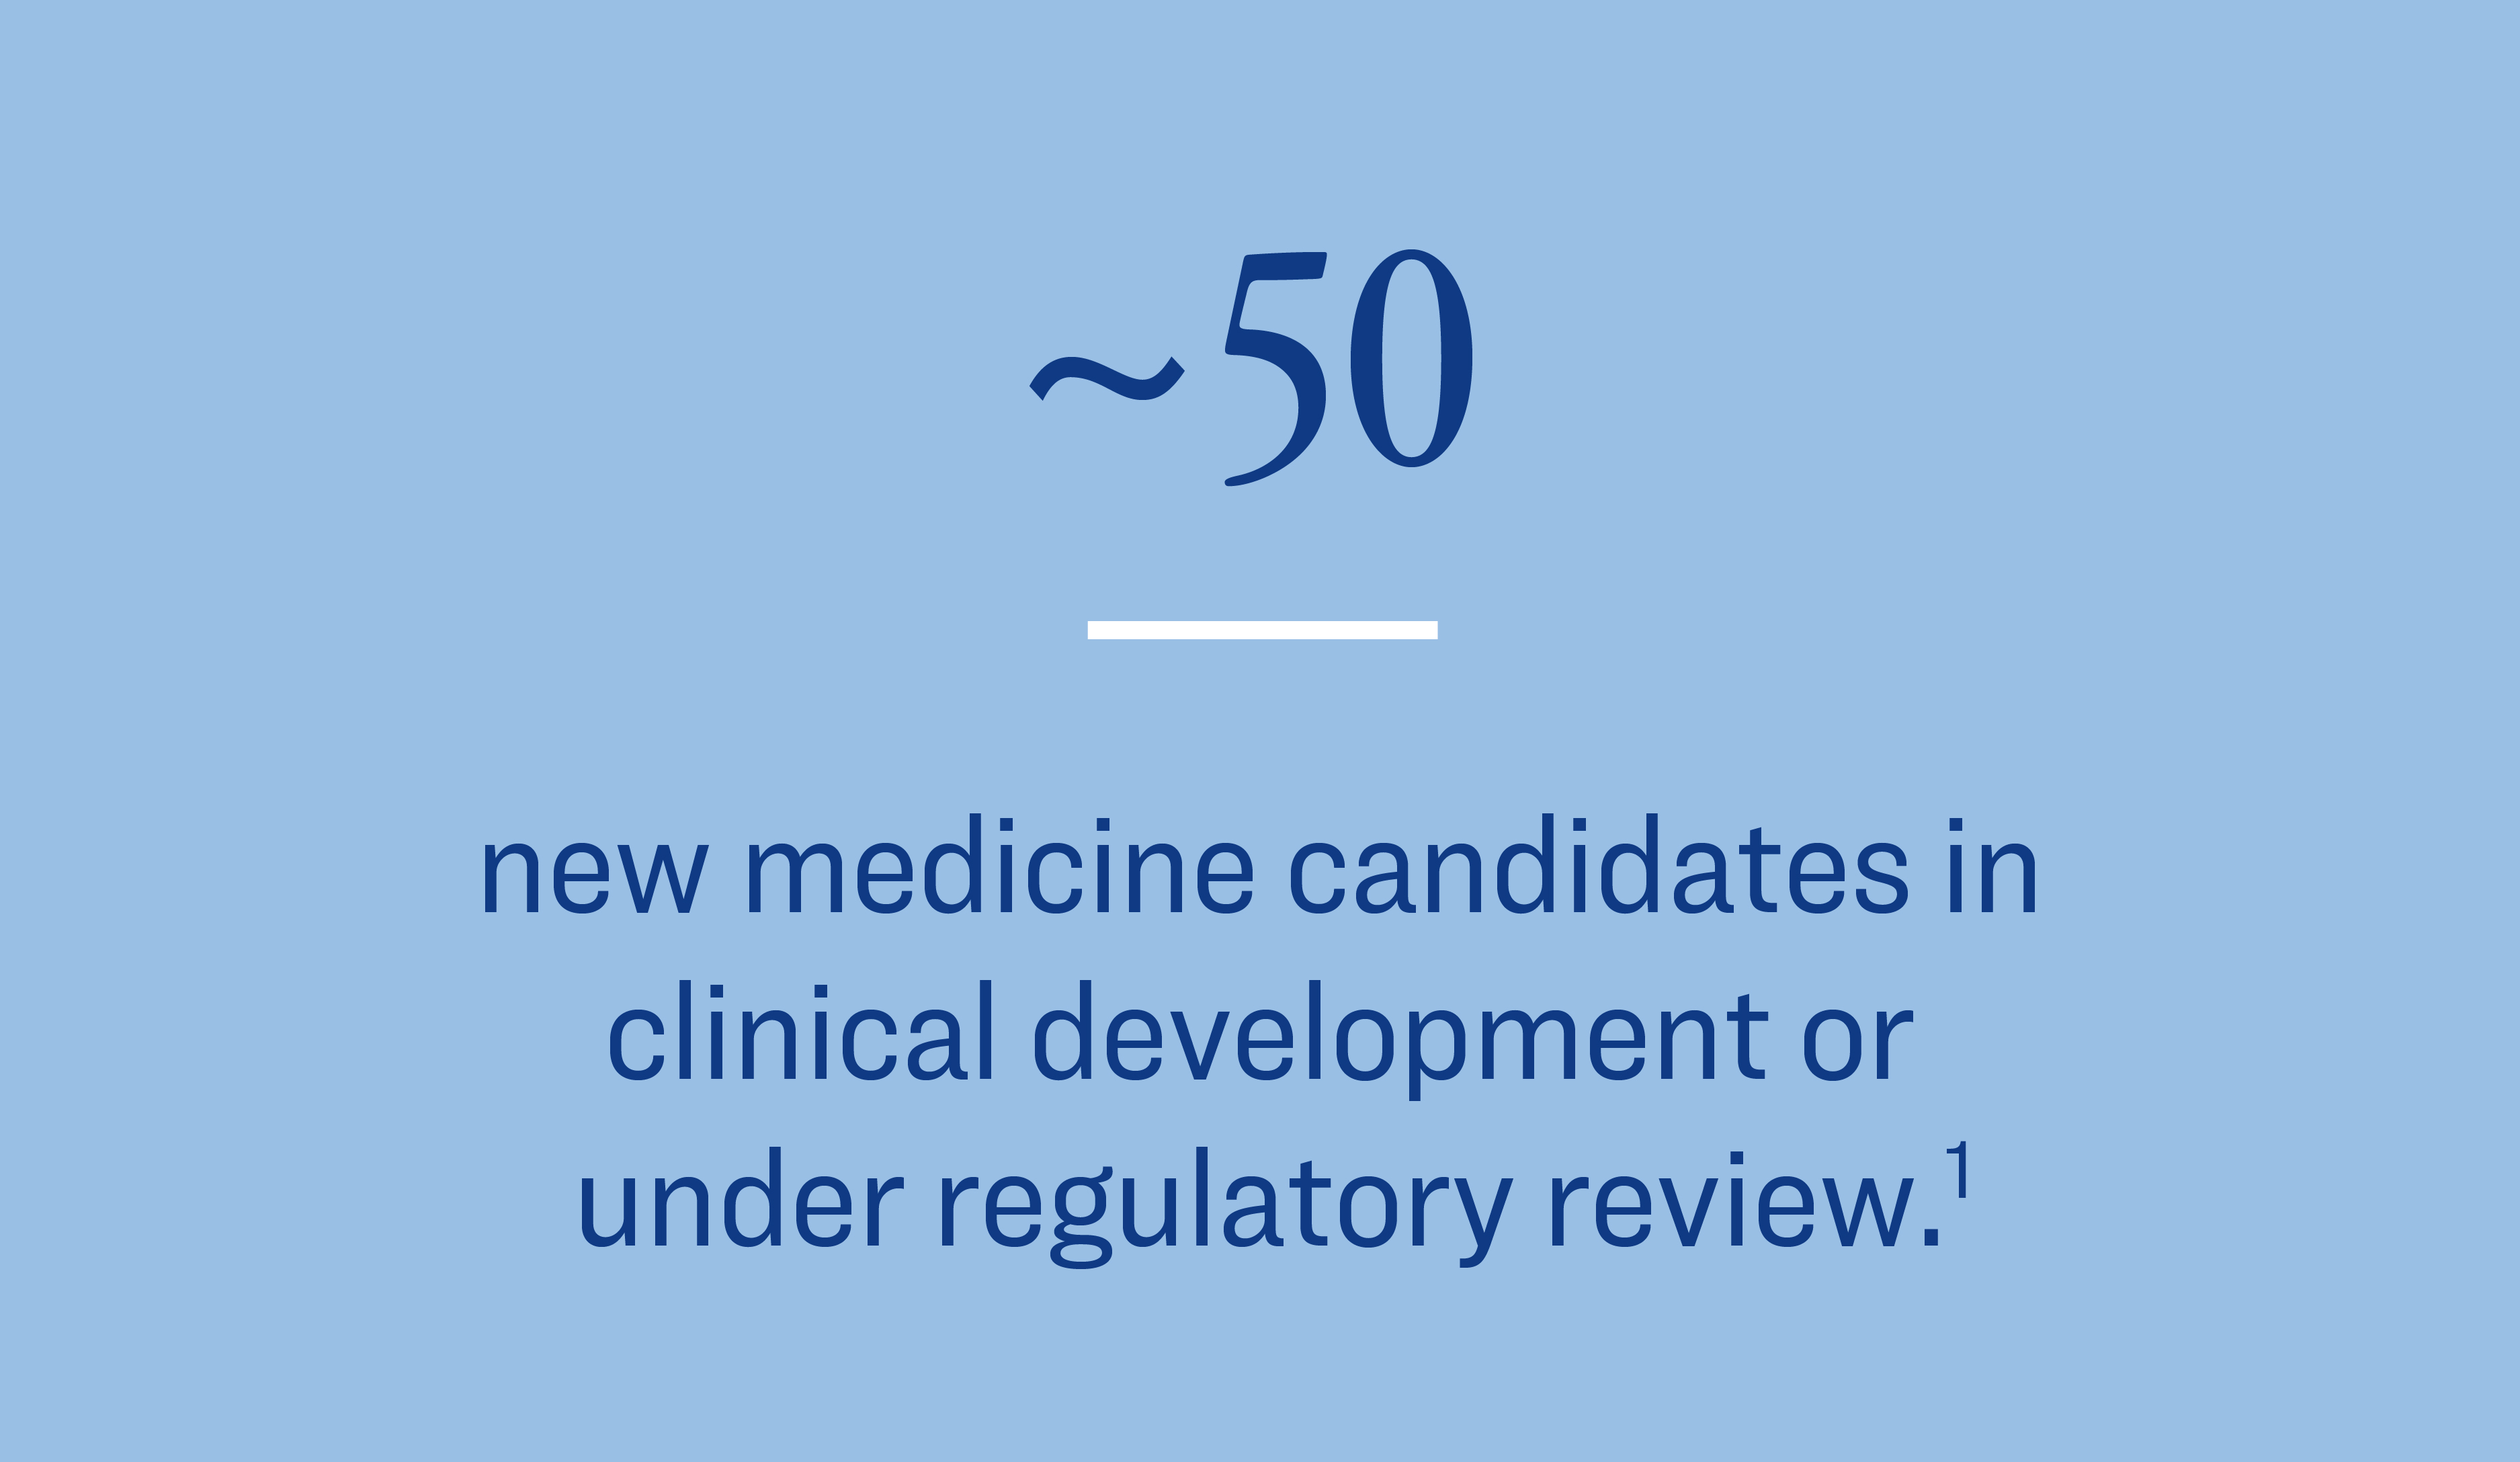 Approximately 50 new medicine candidates in clinical development or under regulatory review.